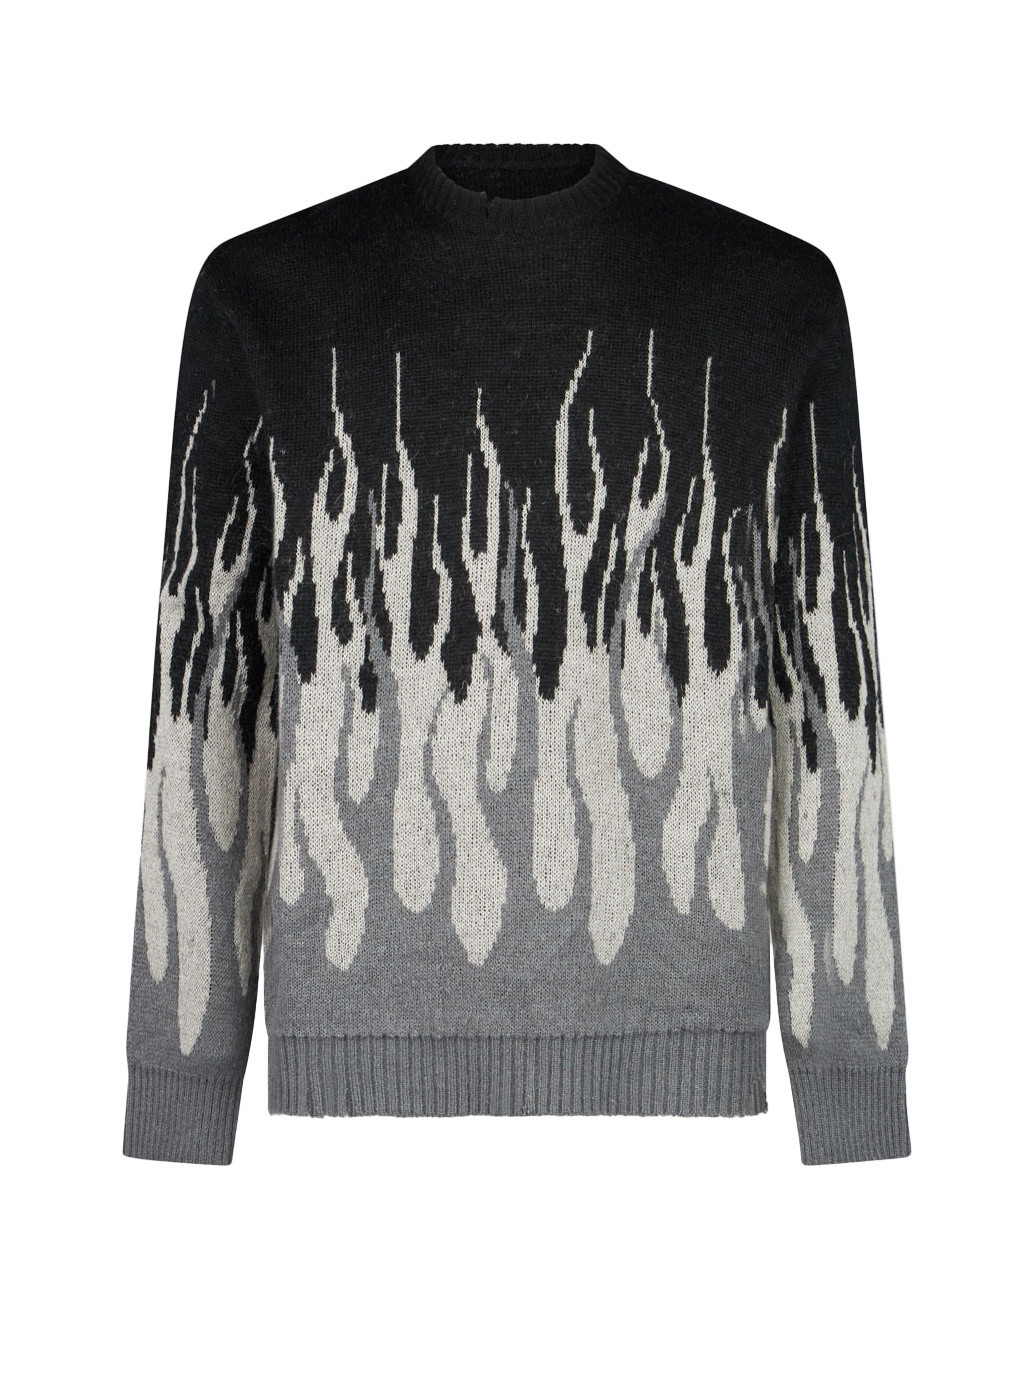 Vision of Super - Double Flame Sweater, Black, large image number 0